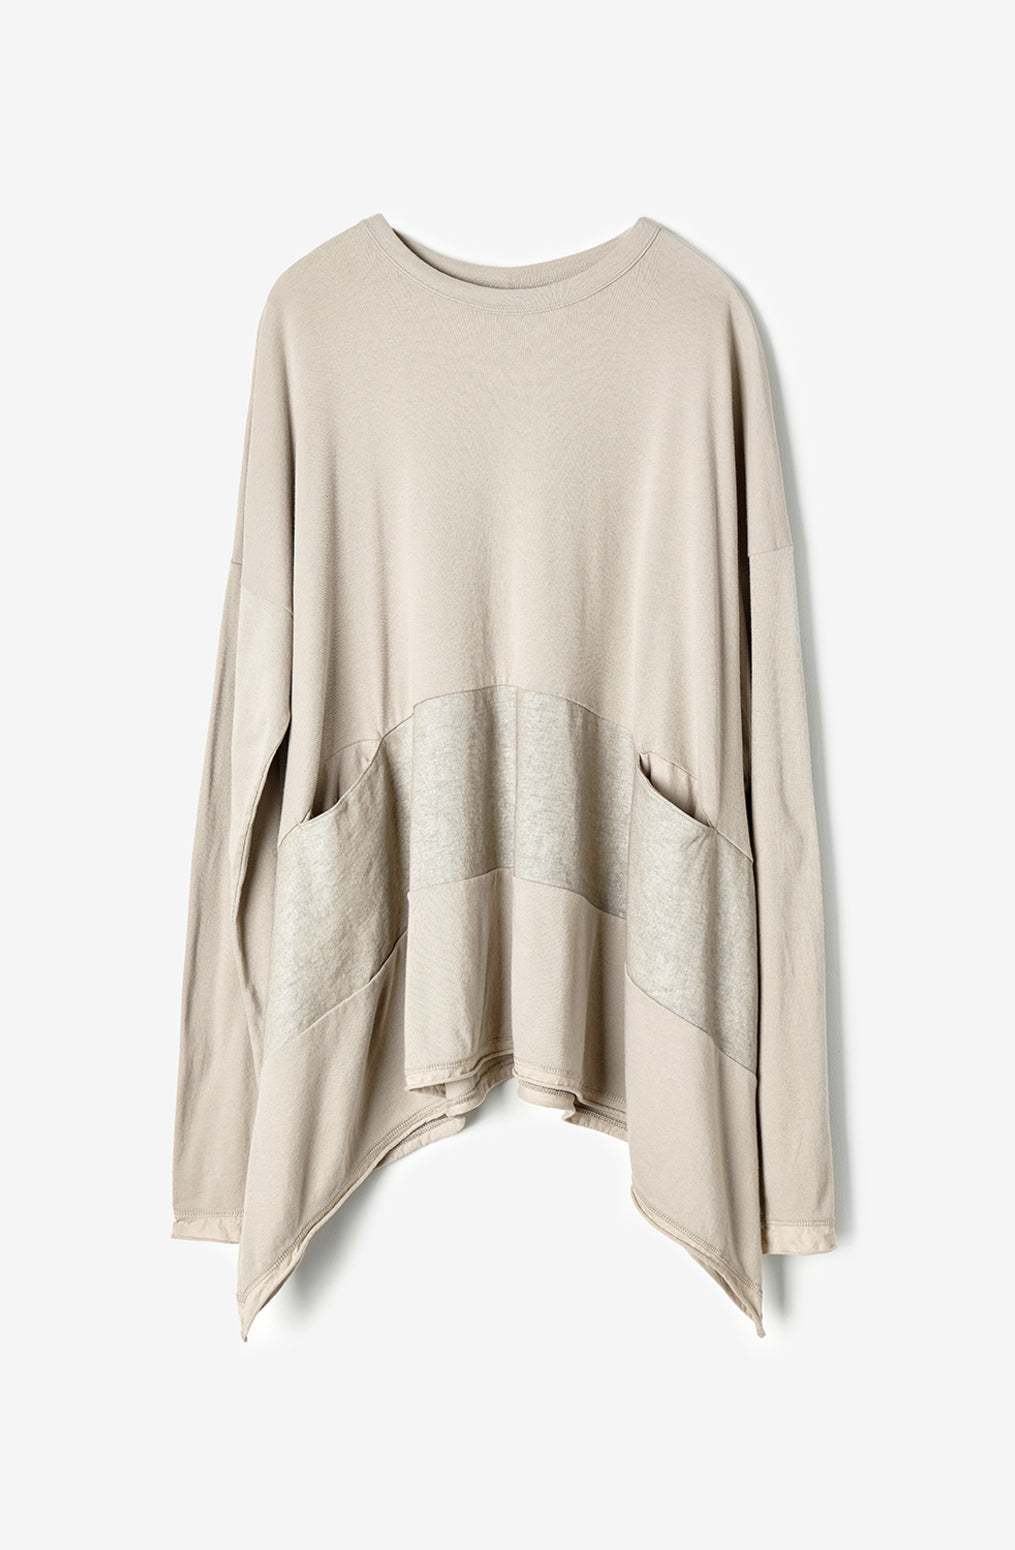 image of Natalie's Pullover